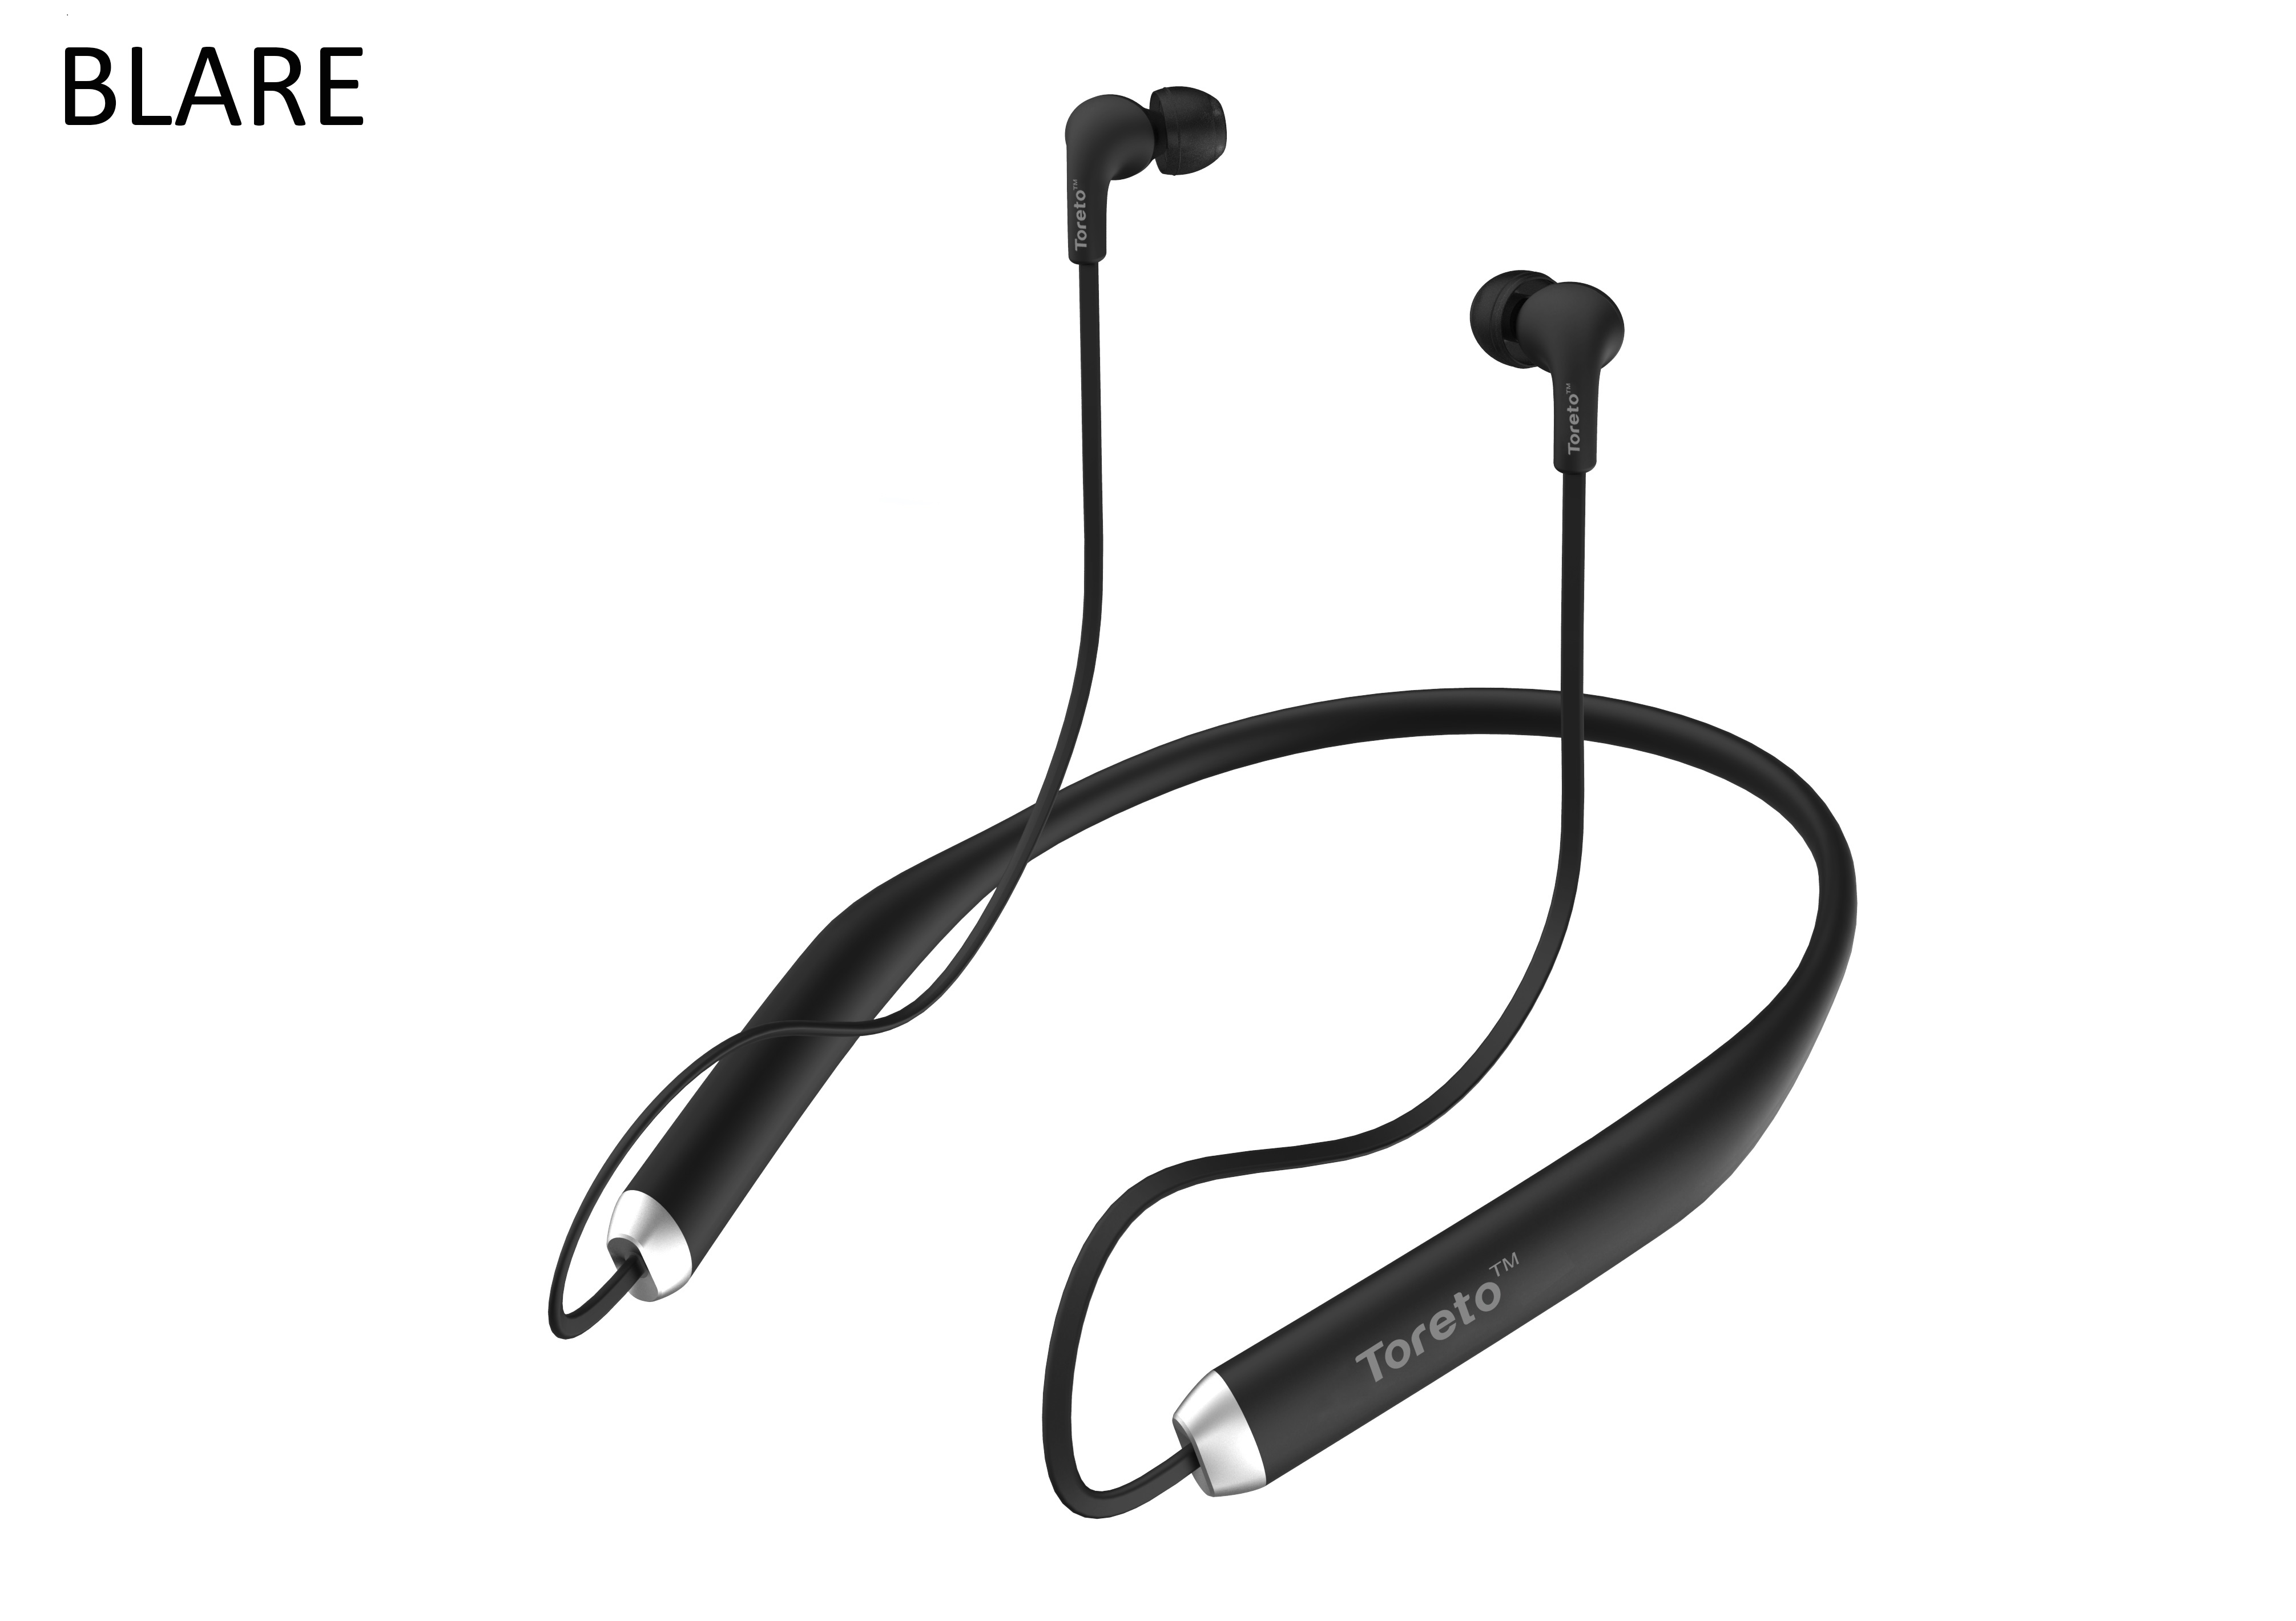 You are currently viewing Toreto unleashes stylish, flexible, water resistant Bluetooth Earphone – TBE-804 Blare